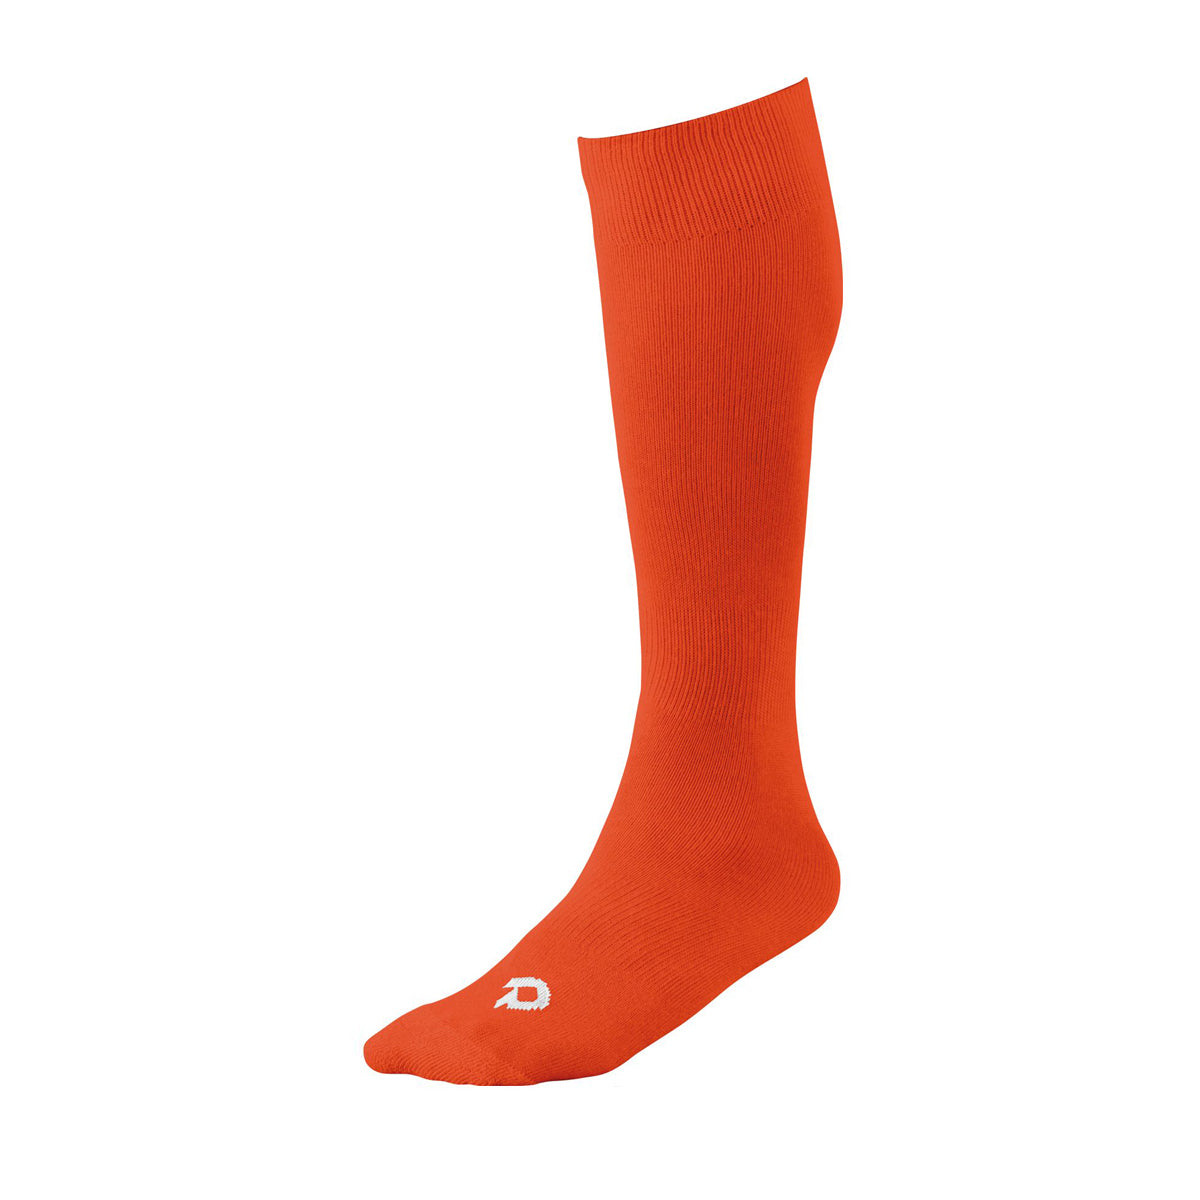 Bloody socks…now available in store and online at 7 pm 4 pst  @sportsworld165